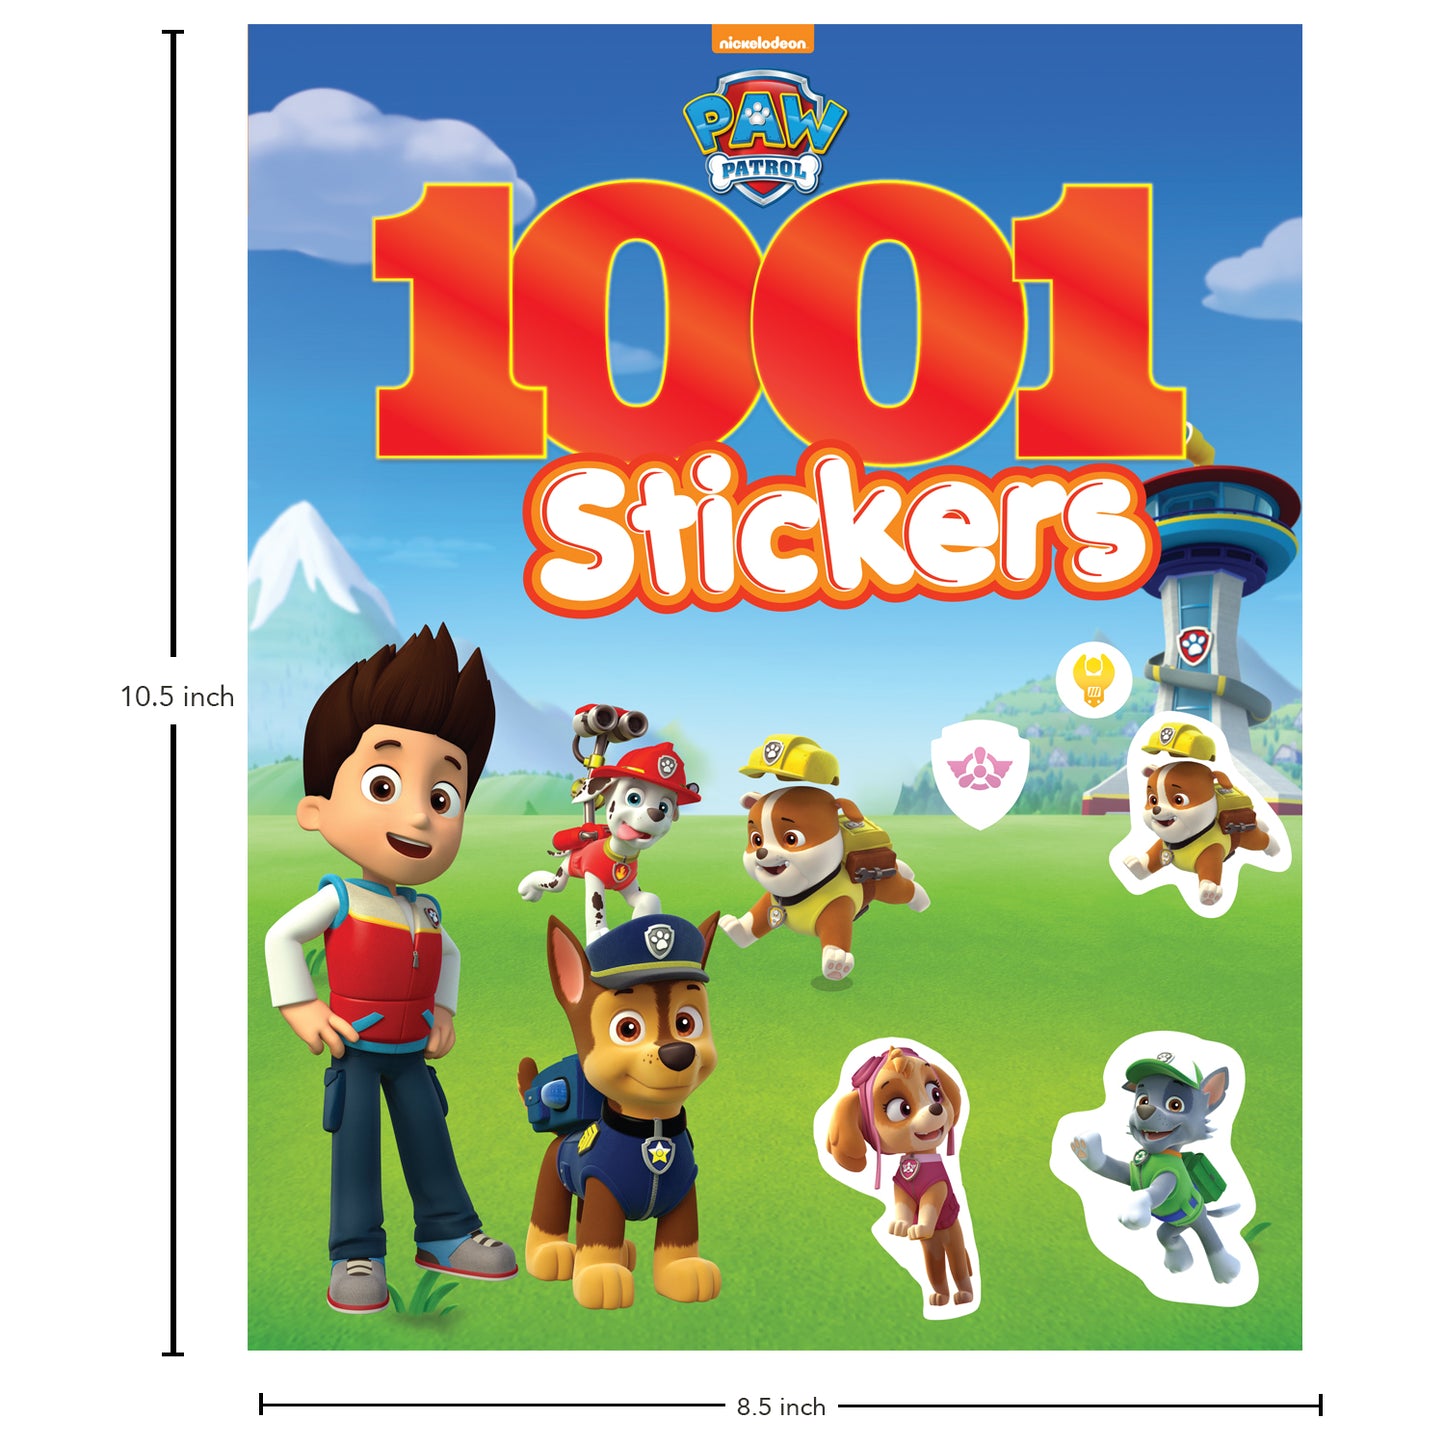 Paw Patrol 1001 Sticker Book | Many Activities with Paw Patrol Stickers for Kids